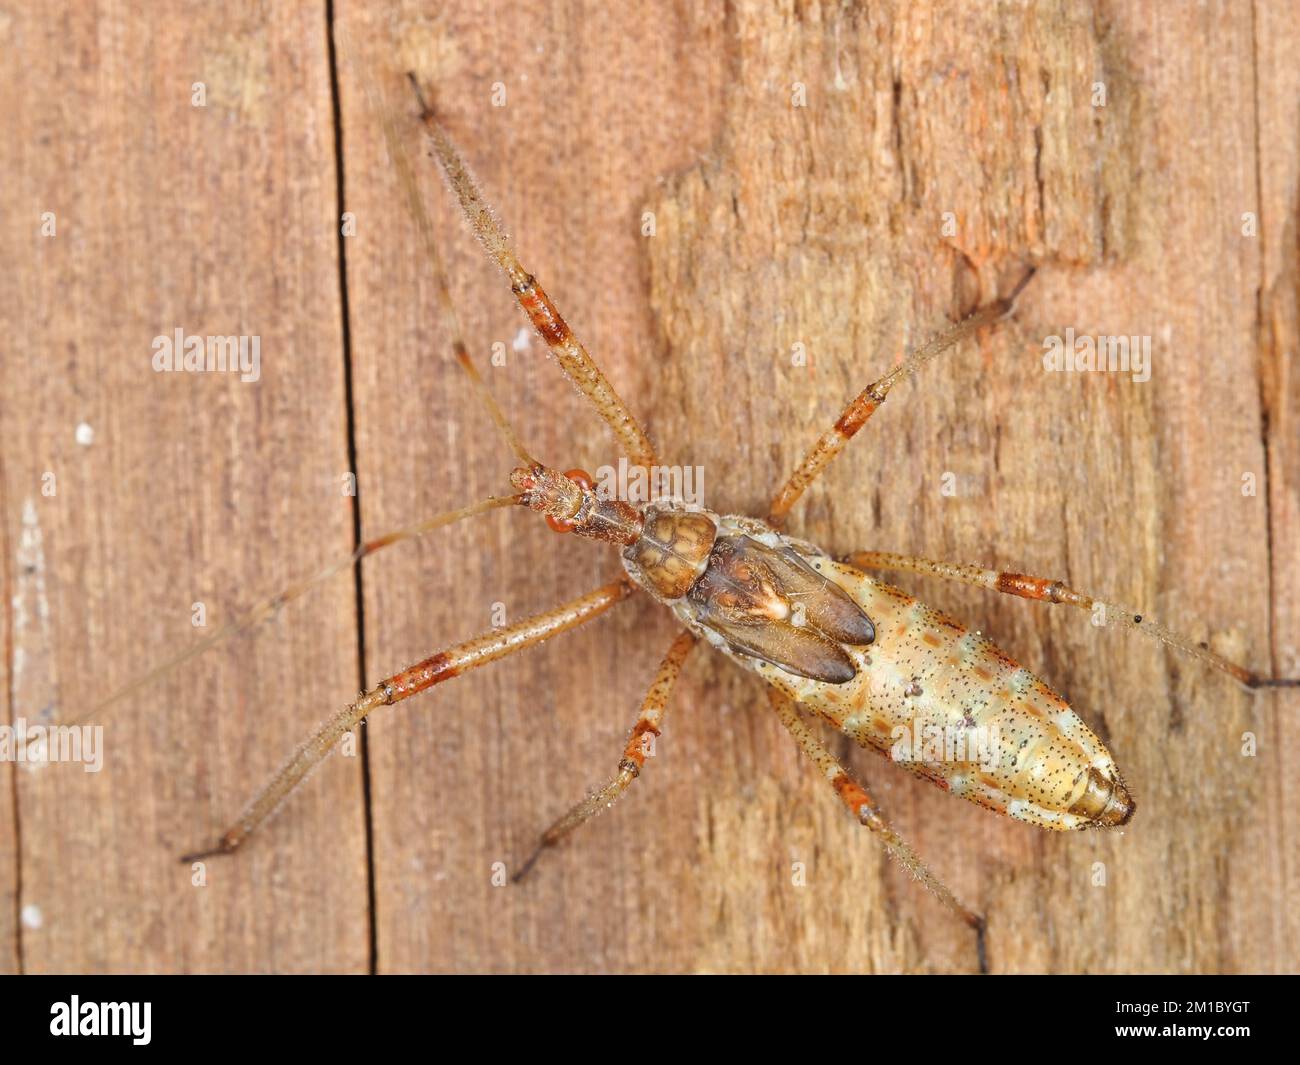 Insect identified as assassin bug nymph, possibly Zelus tetracanthus Stock Photo